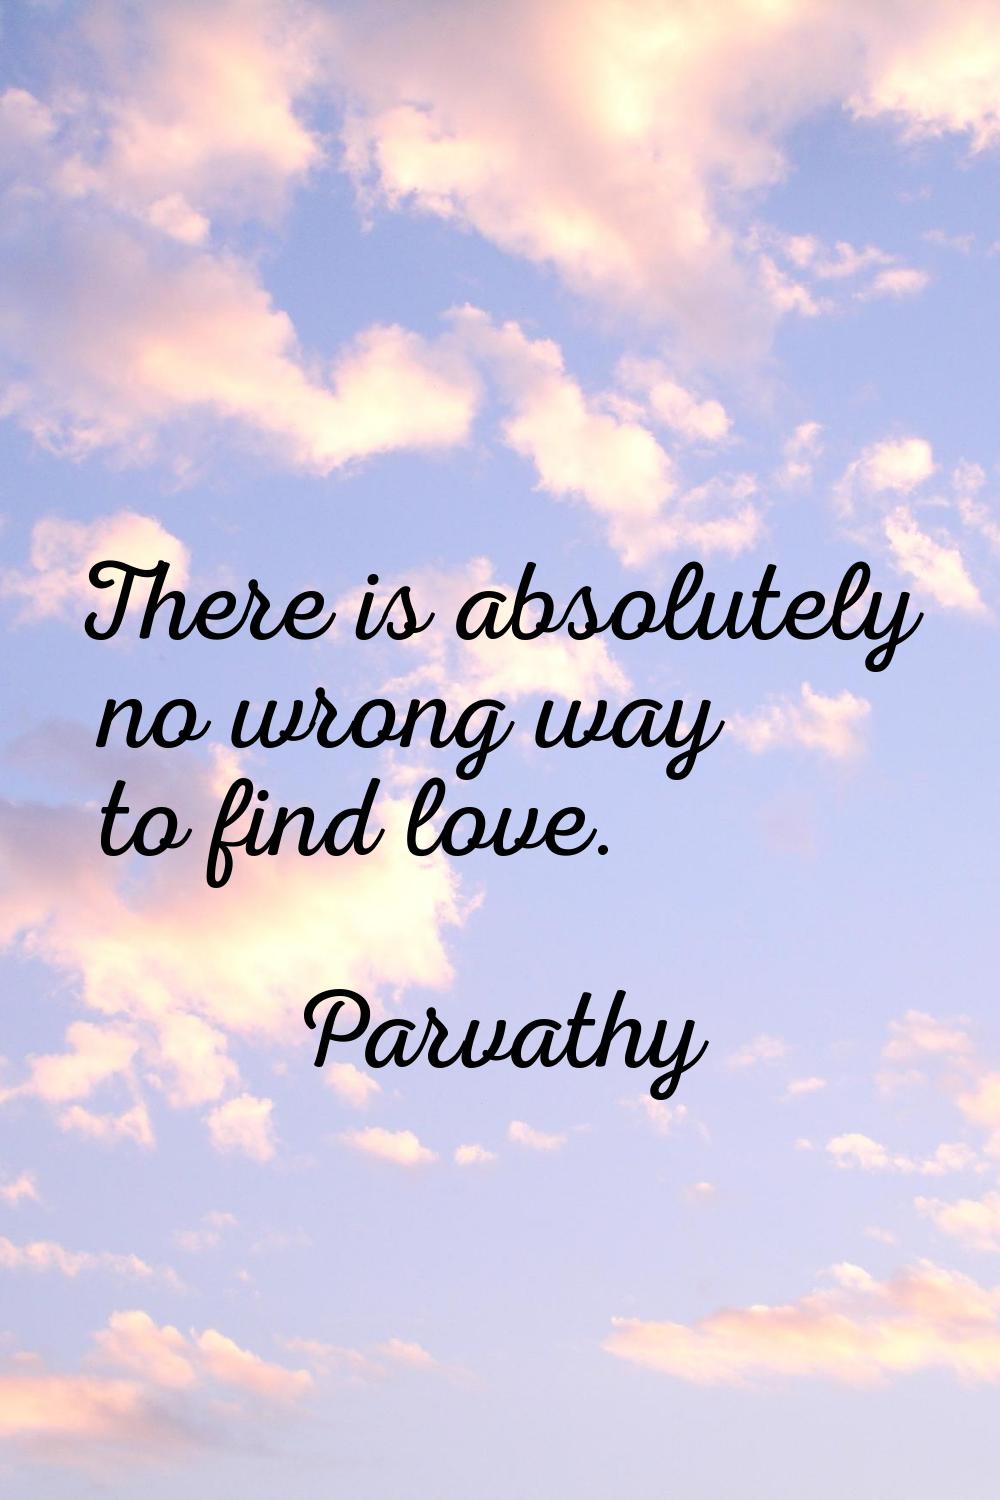 There is absolutely no wrong way to find love.